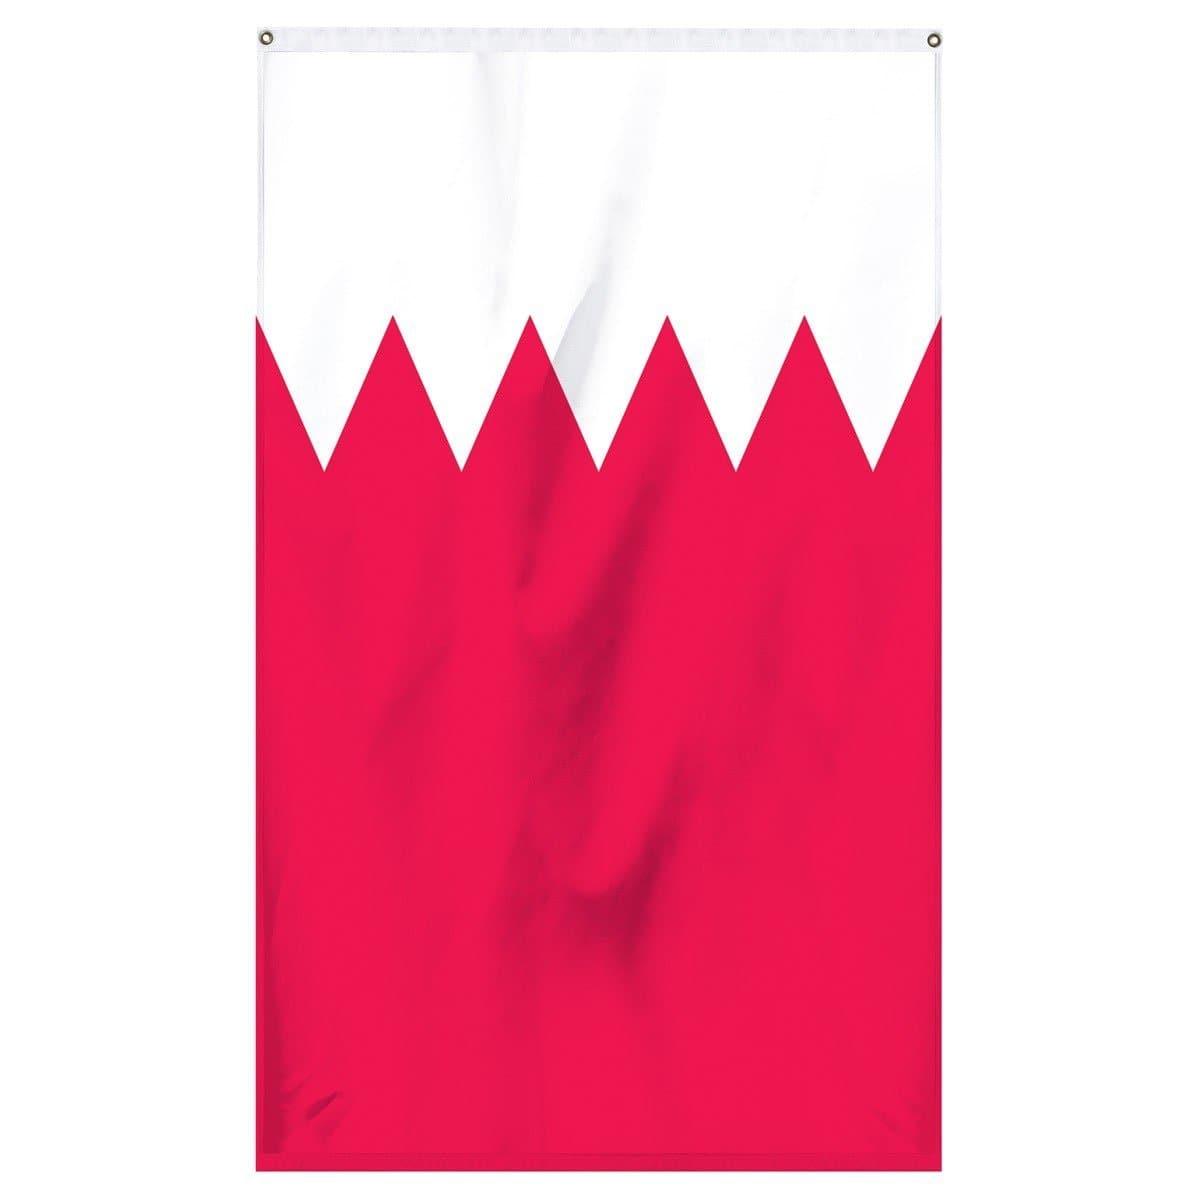 Bahrain international flag for sale to fly up on a flagpole